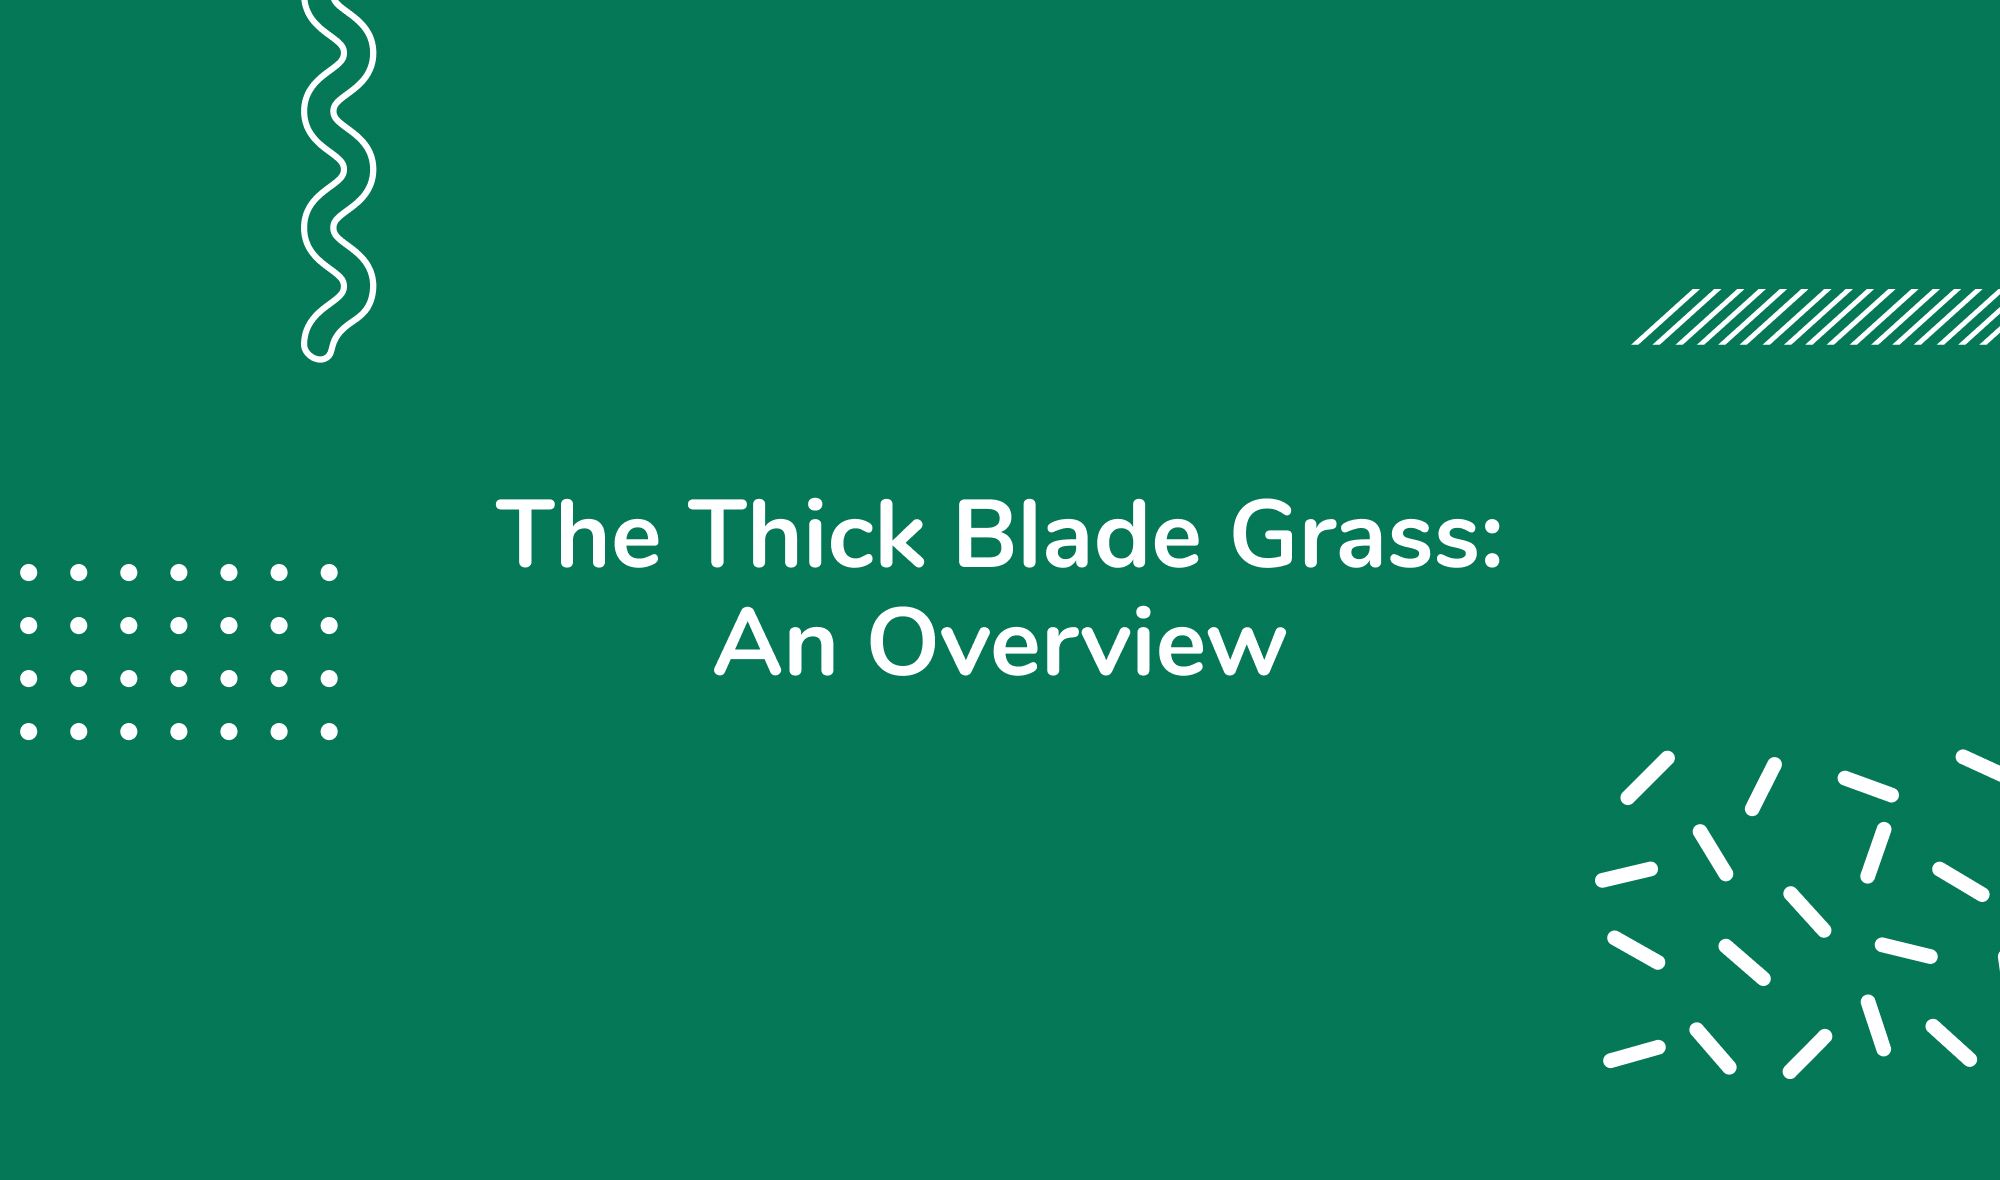 The Thick Blade Grass: An Overview